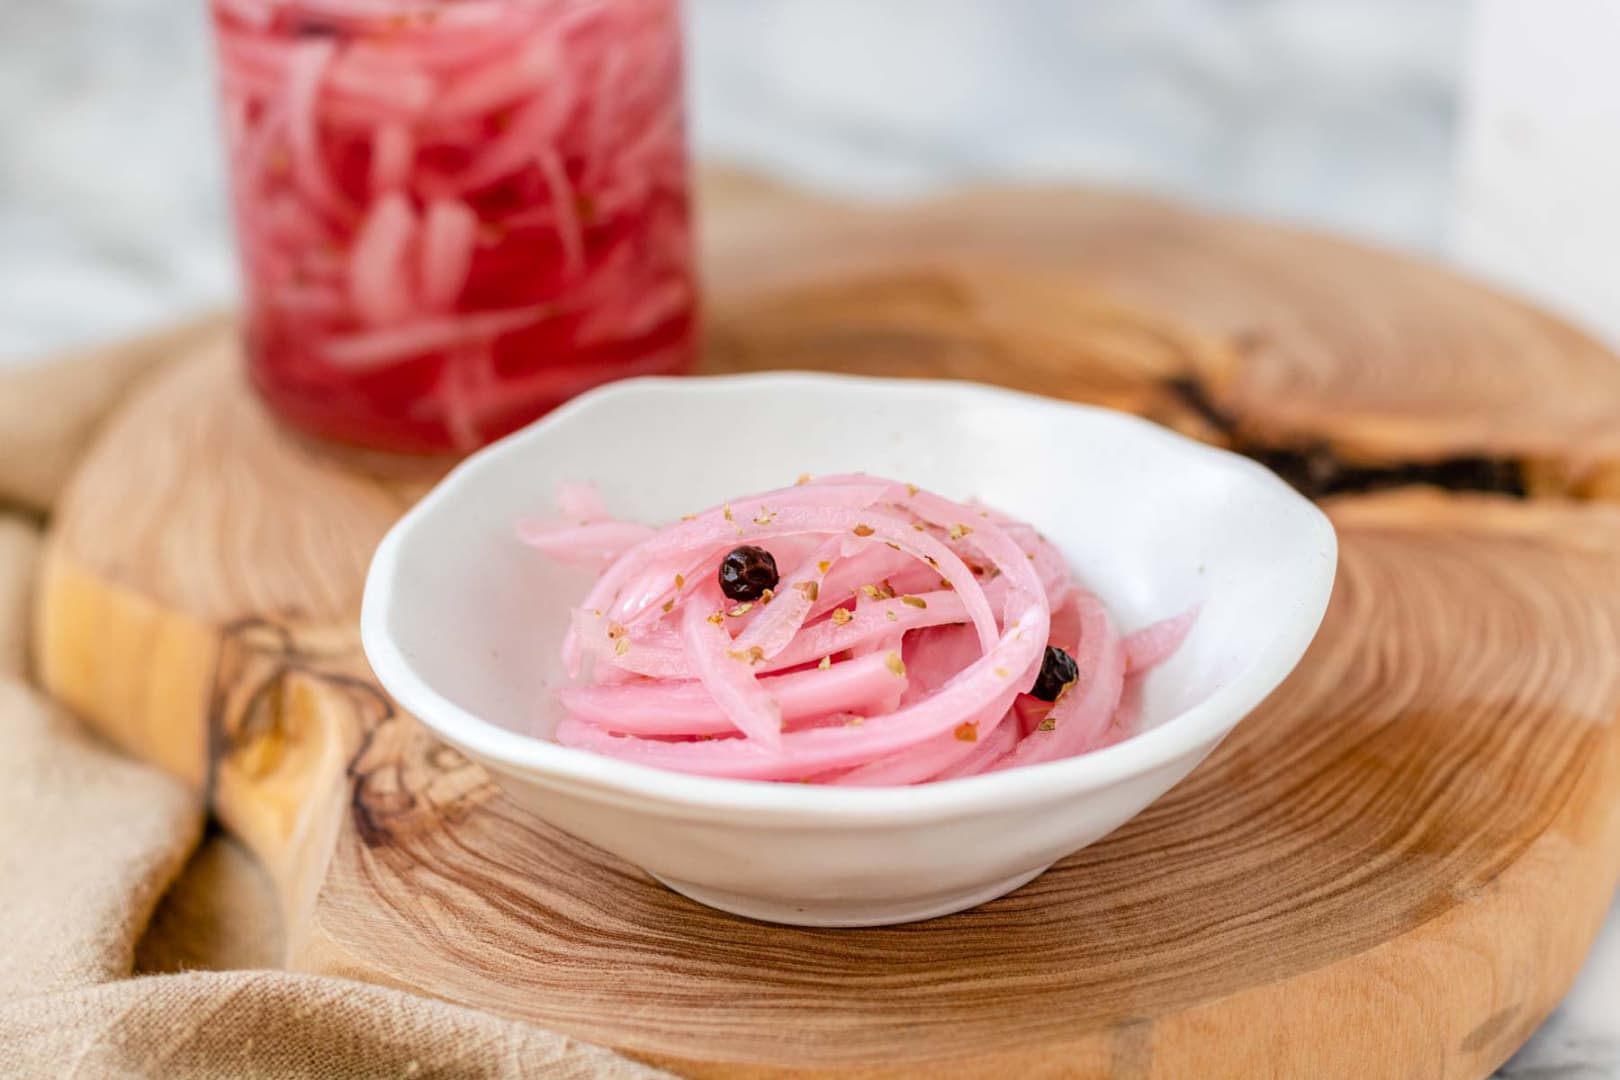 Pickled red onion ⋆ MeCooks Blog